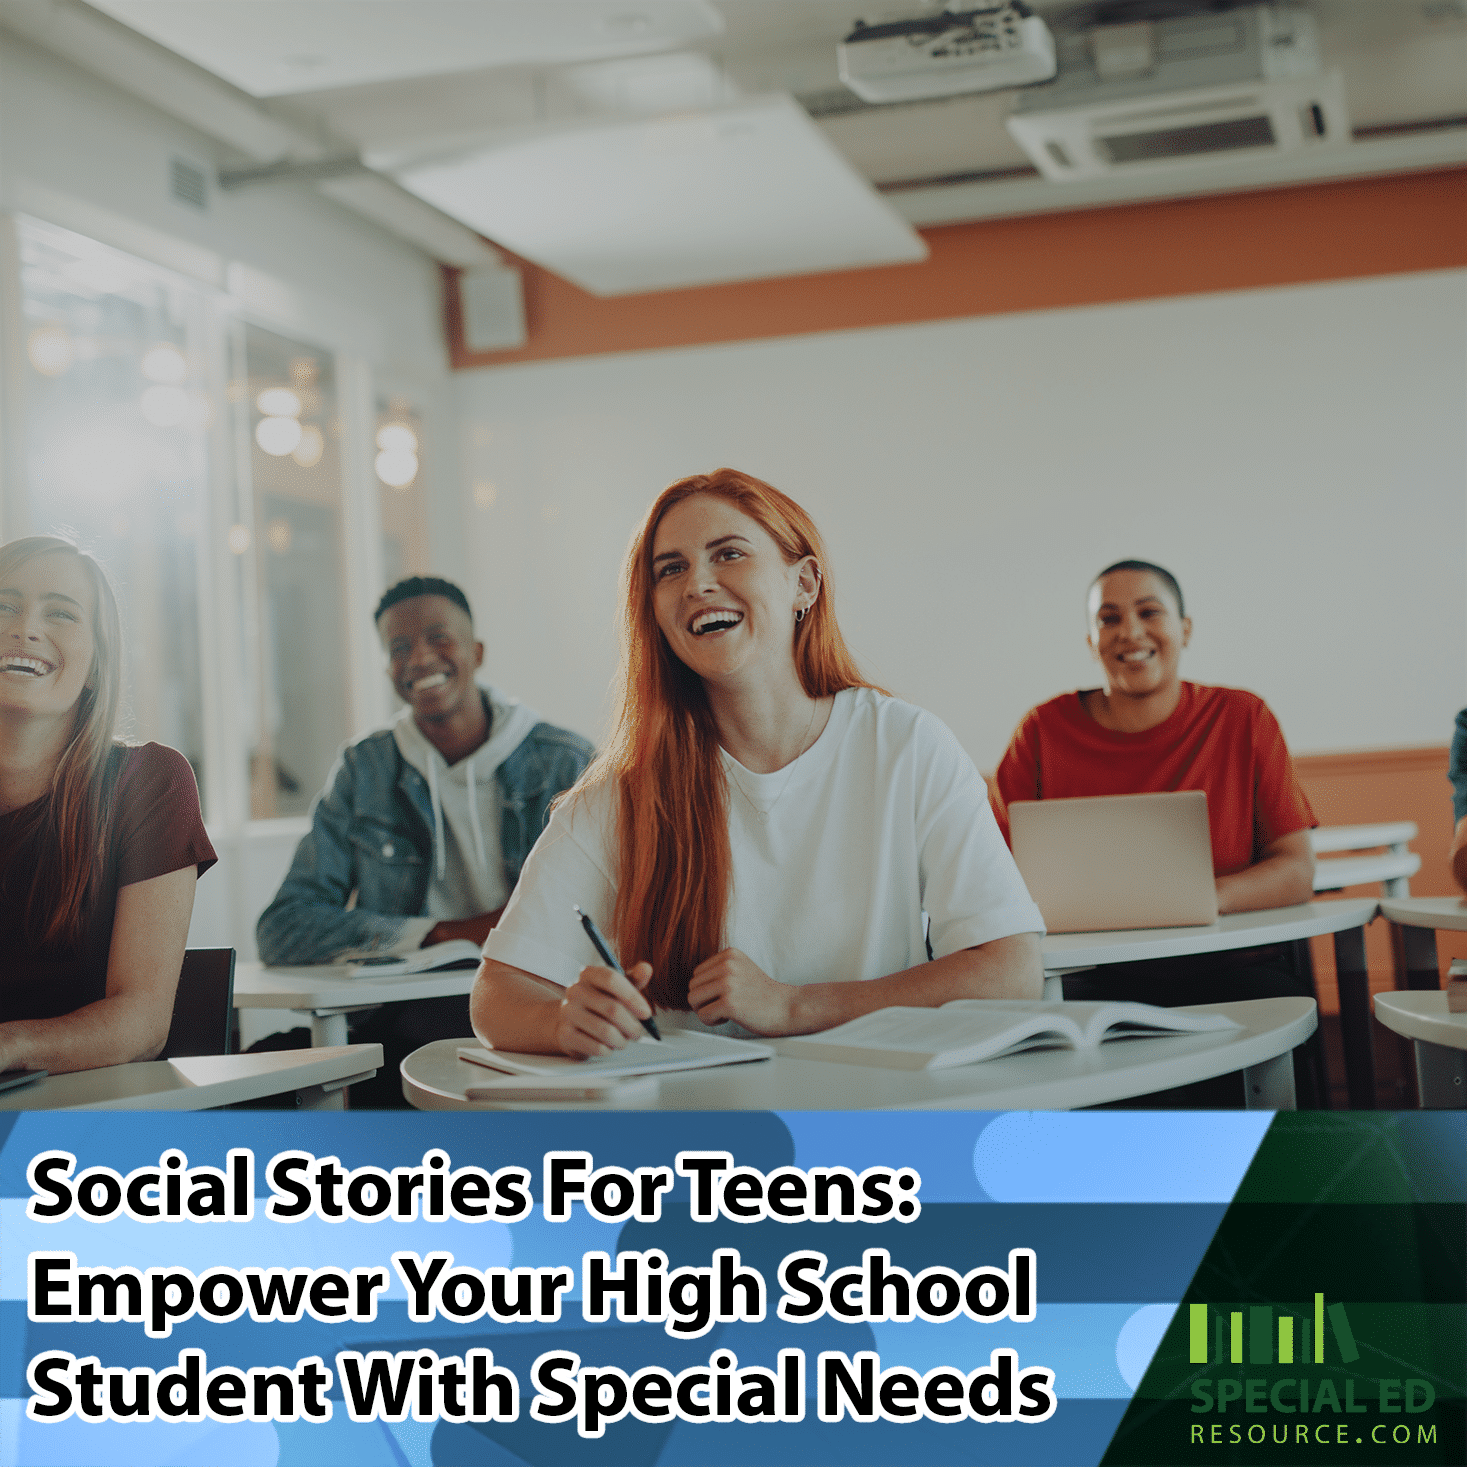 A high school classroom where the teacher is using social stories for teens to help students with social skills and communication.